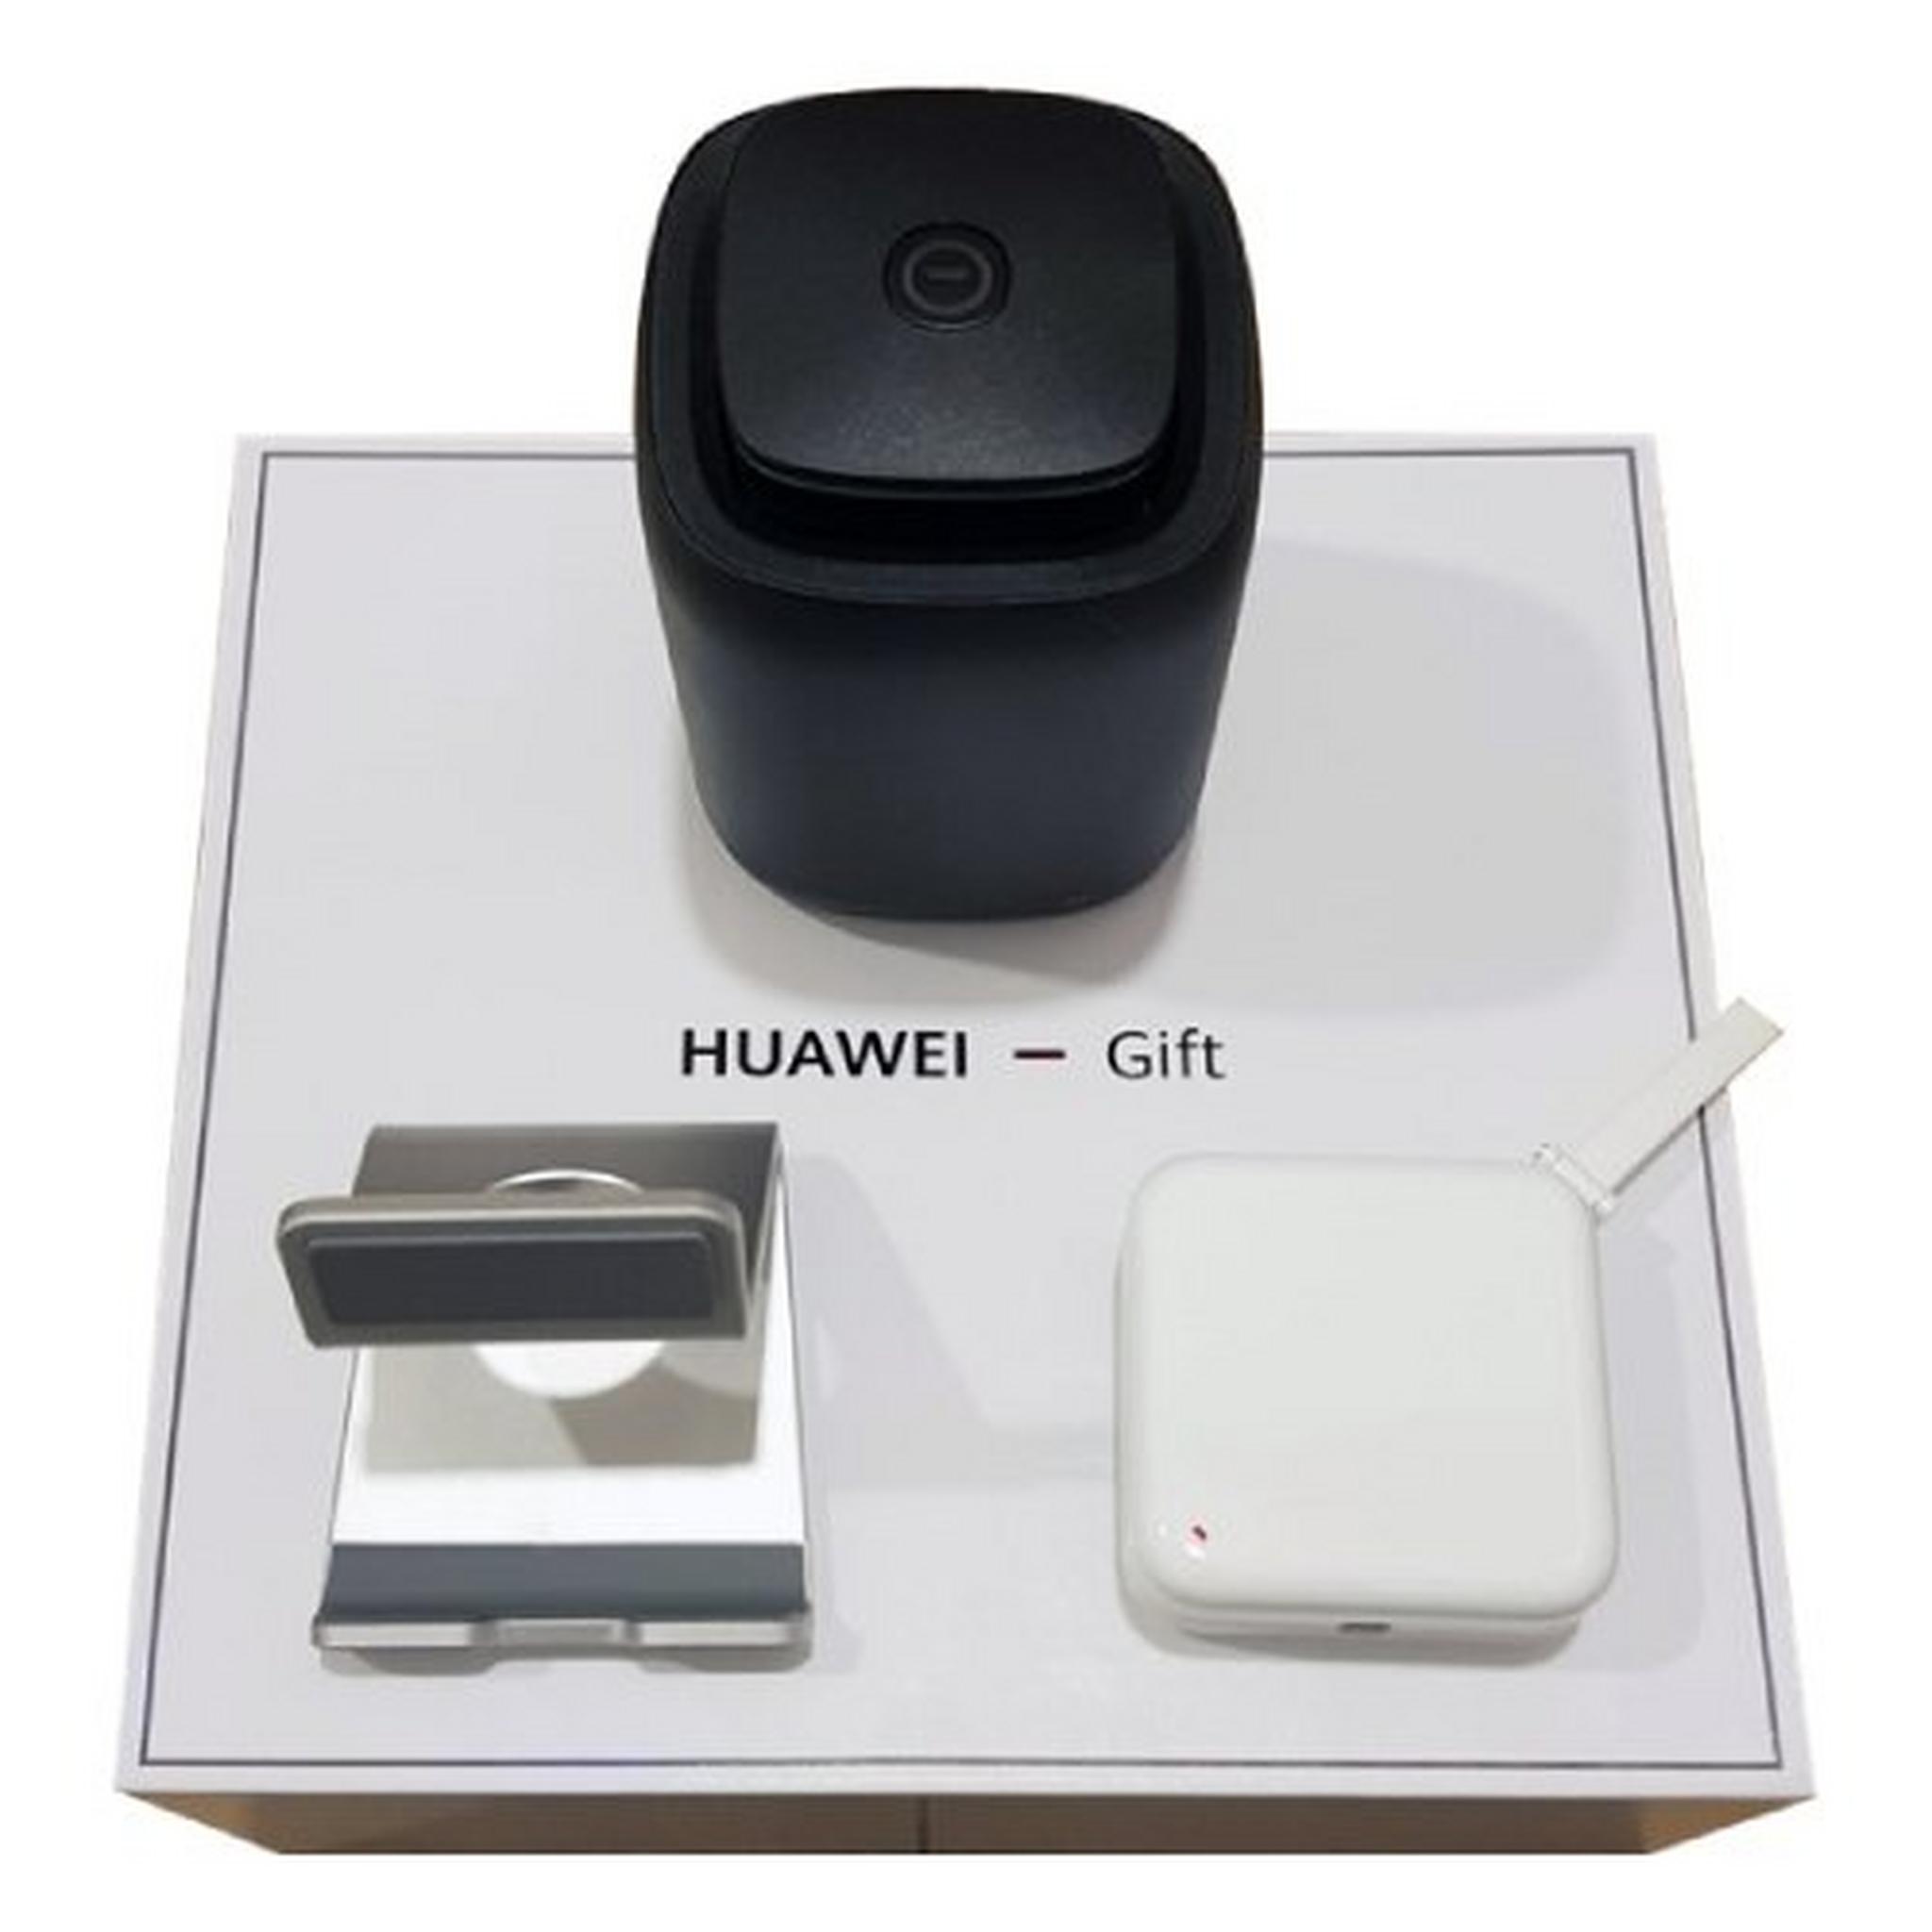 Huawei Bluetooth Speaker+ USB Charging Cable + Phone Stand Gift Box